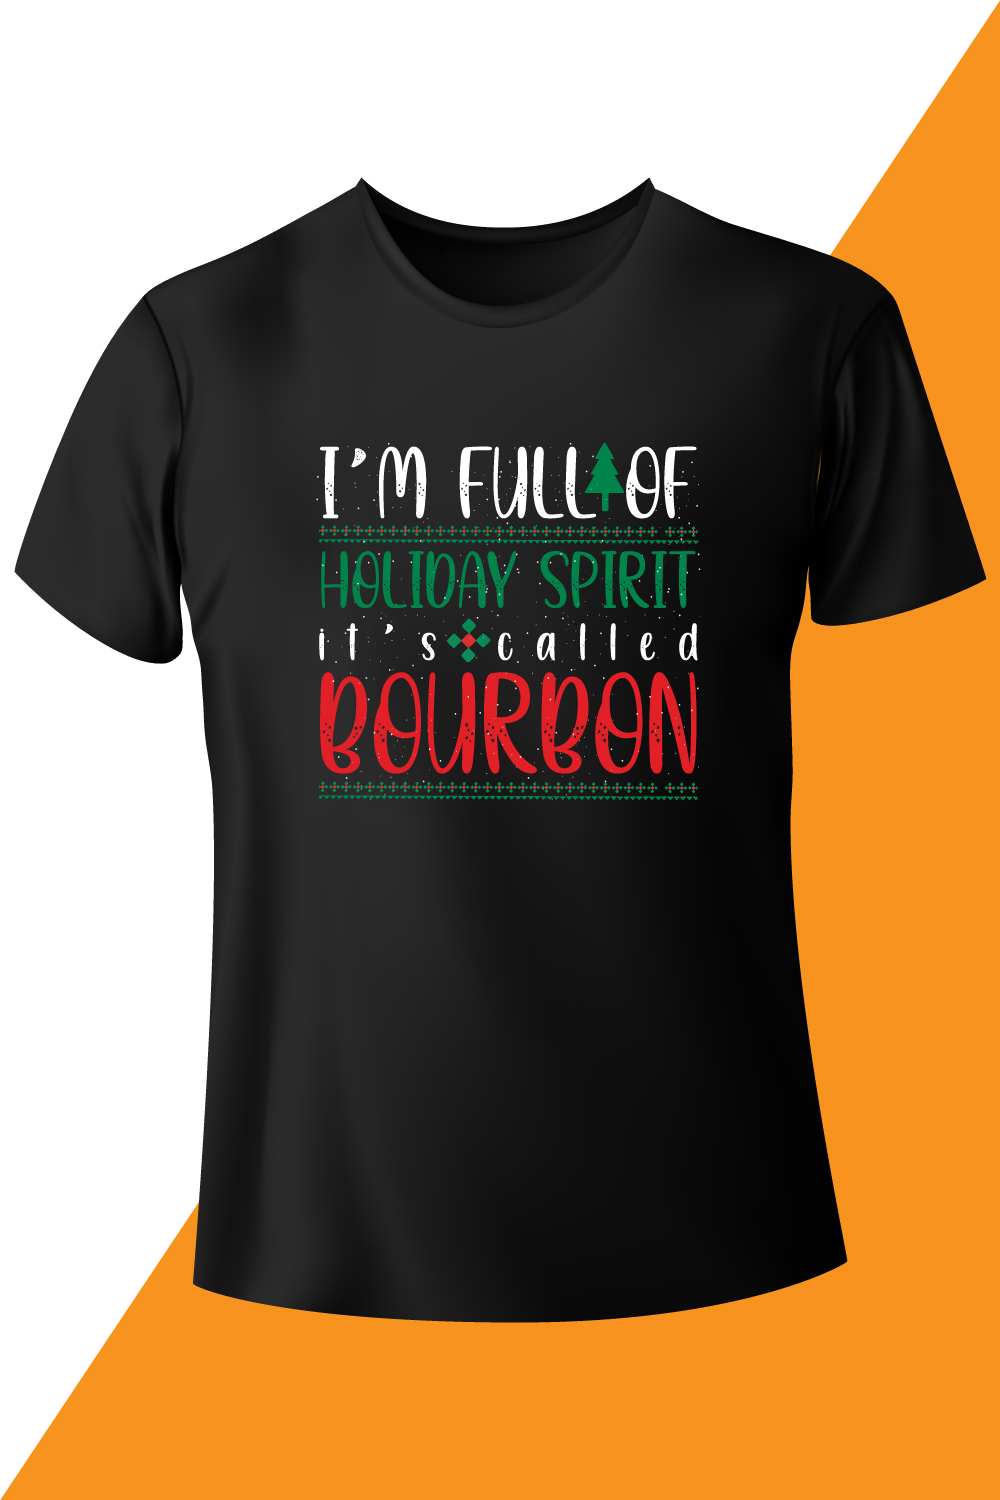 Picture of a black t-shirt with an amazing slogan i'm full of holiday spirit its called bourbon.